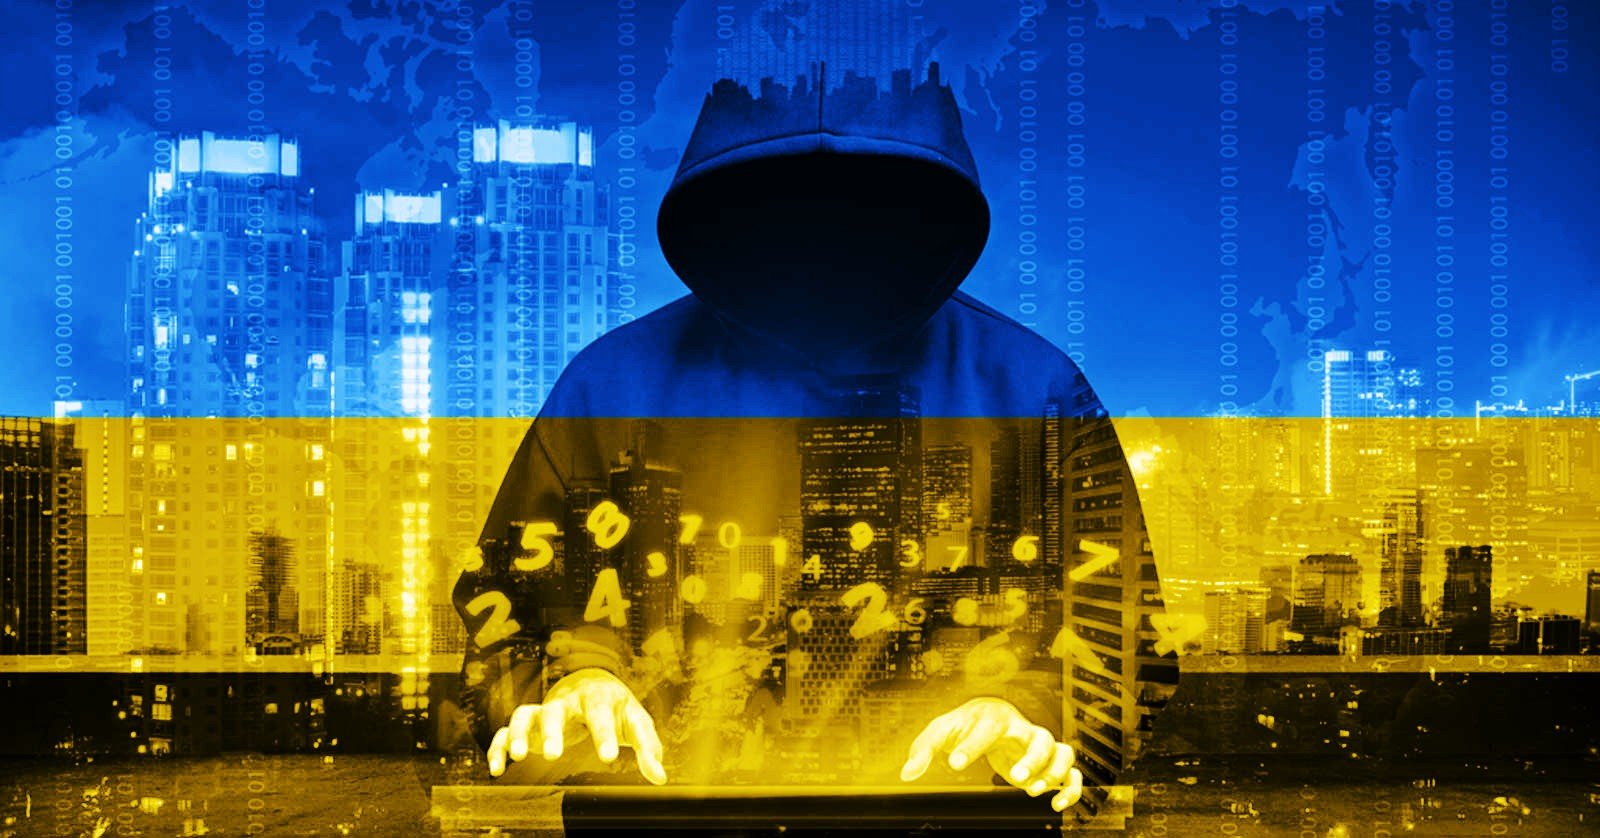 Ukraine: Hack wiped 2 petabytes of data from Russian research center